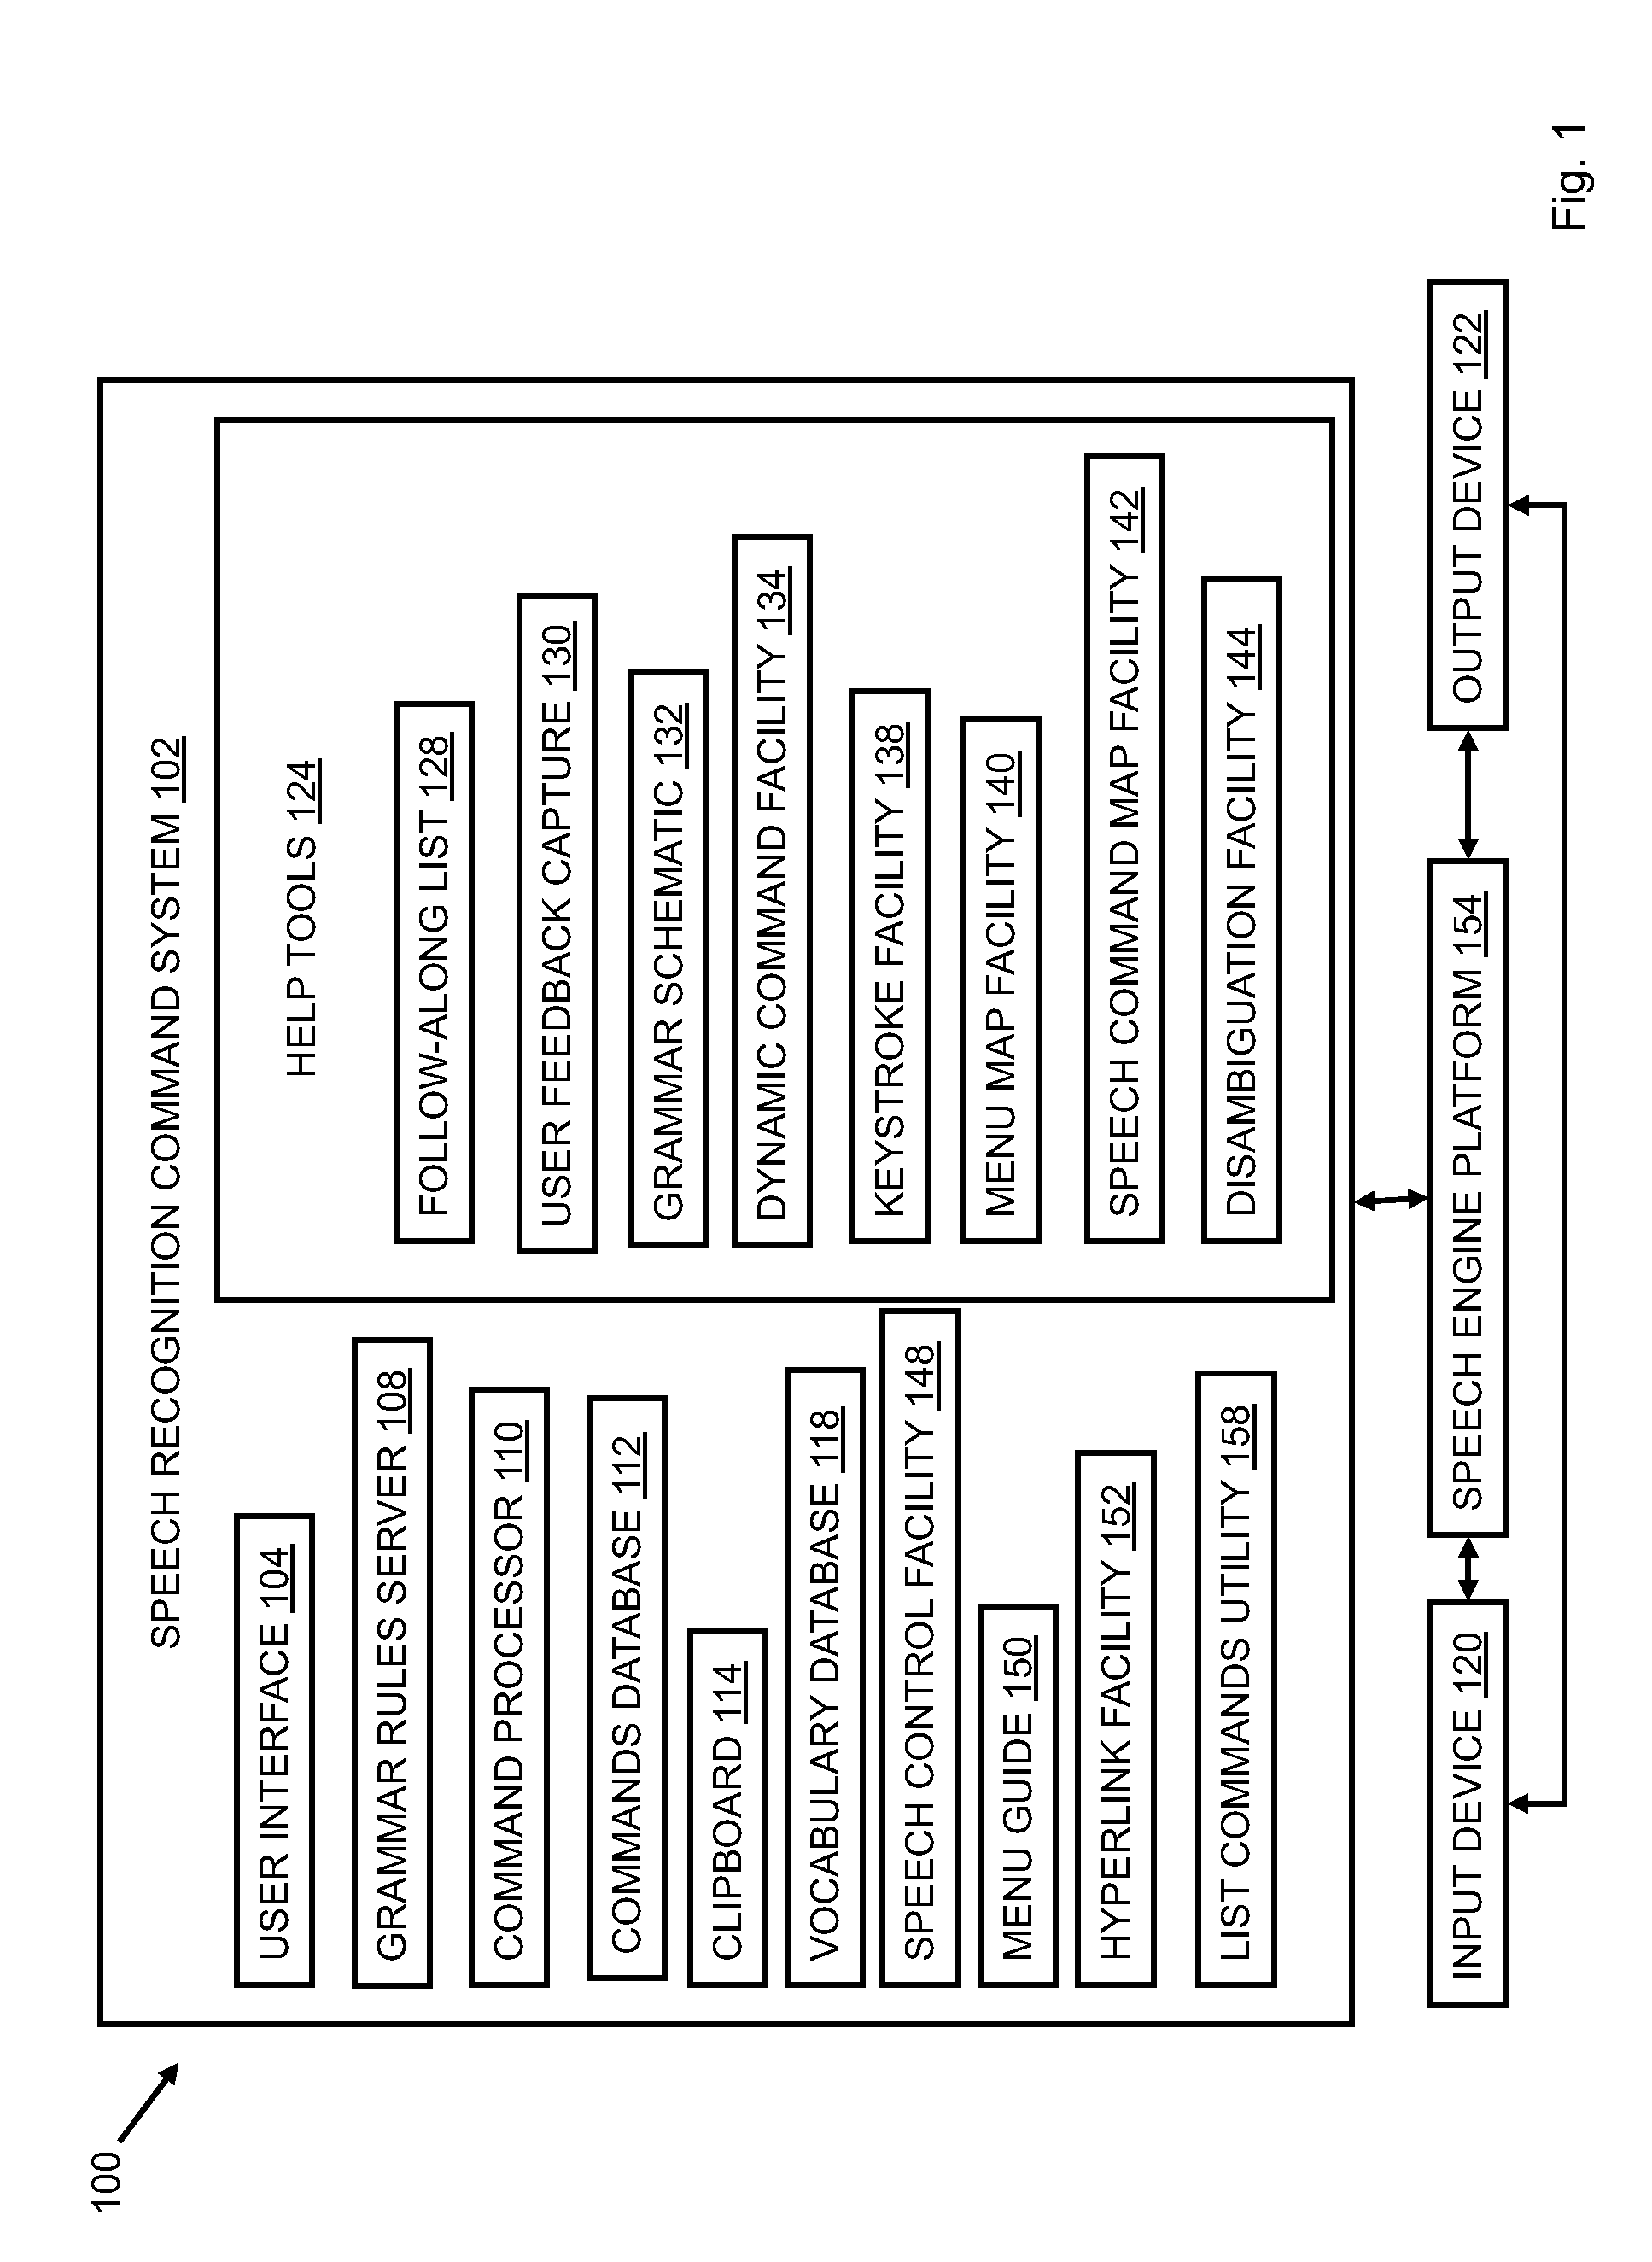 System and method of a list commands utility for a speech recognition command system